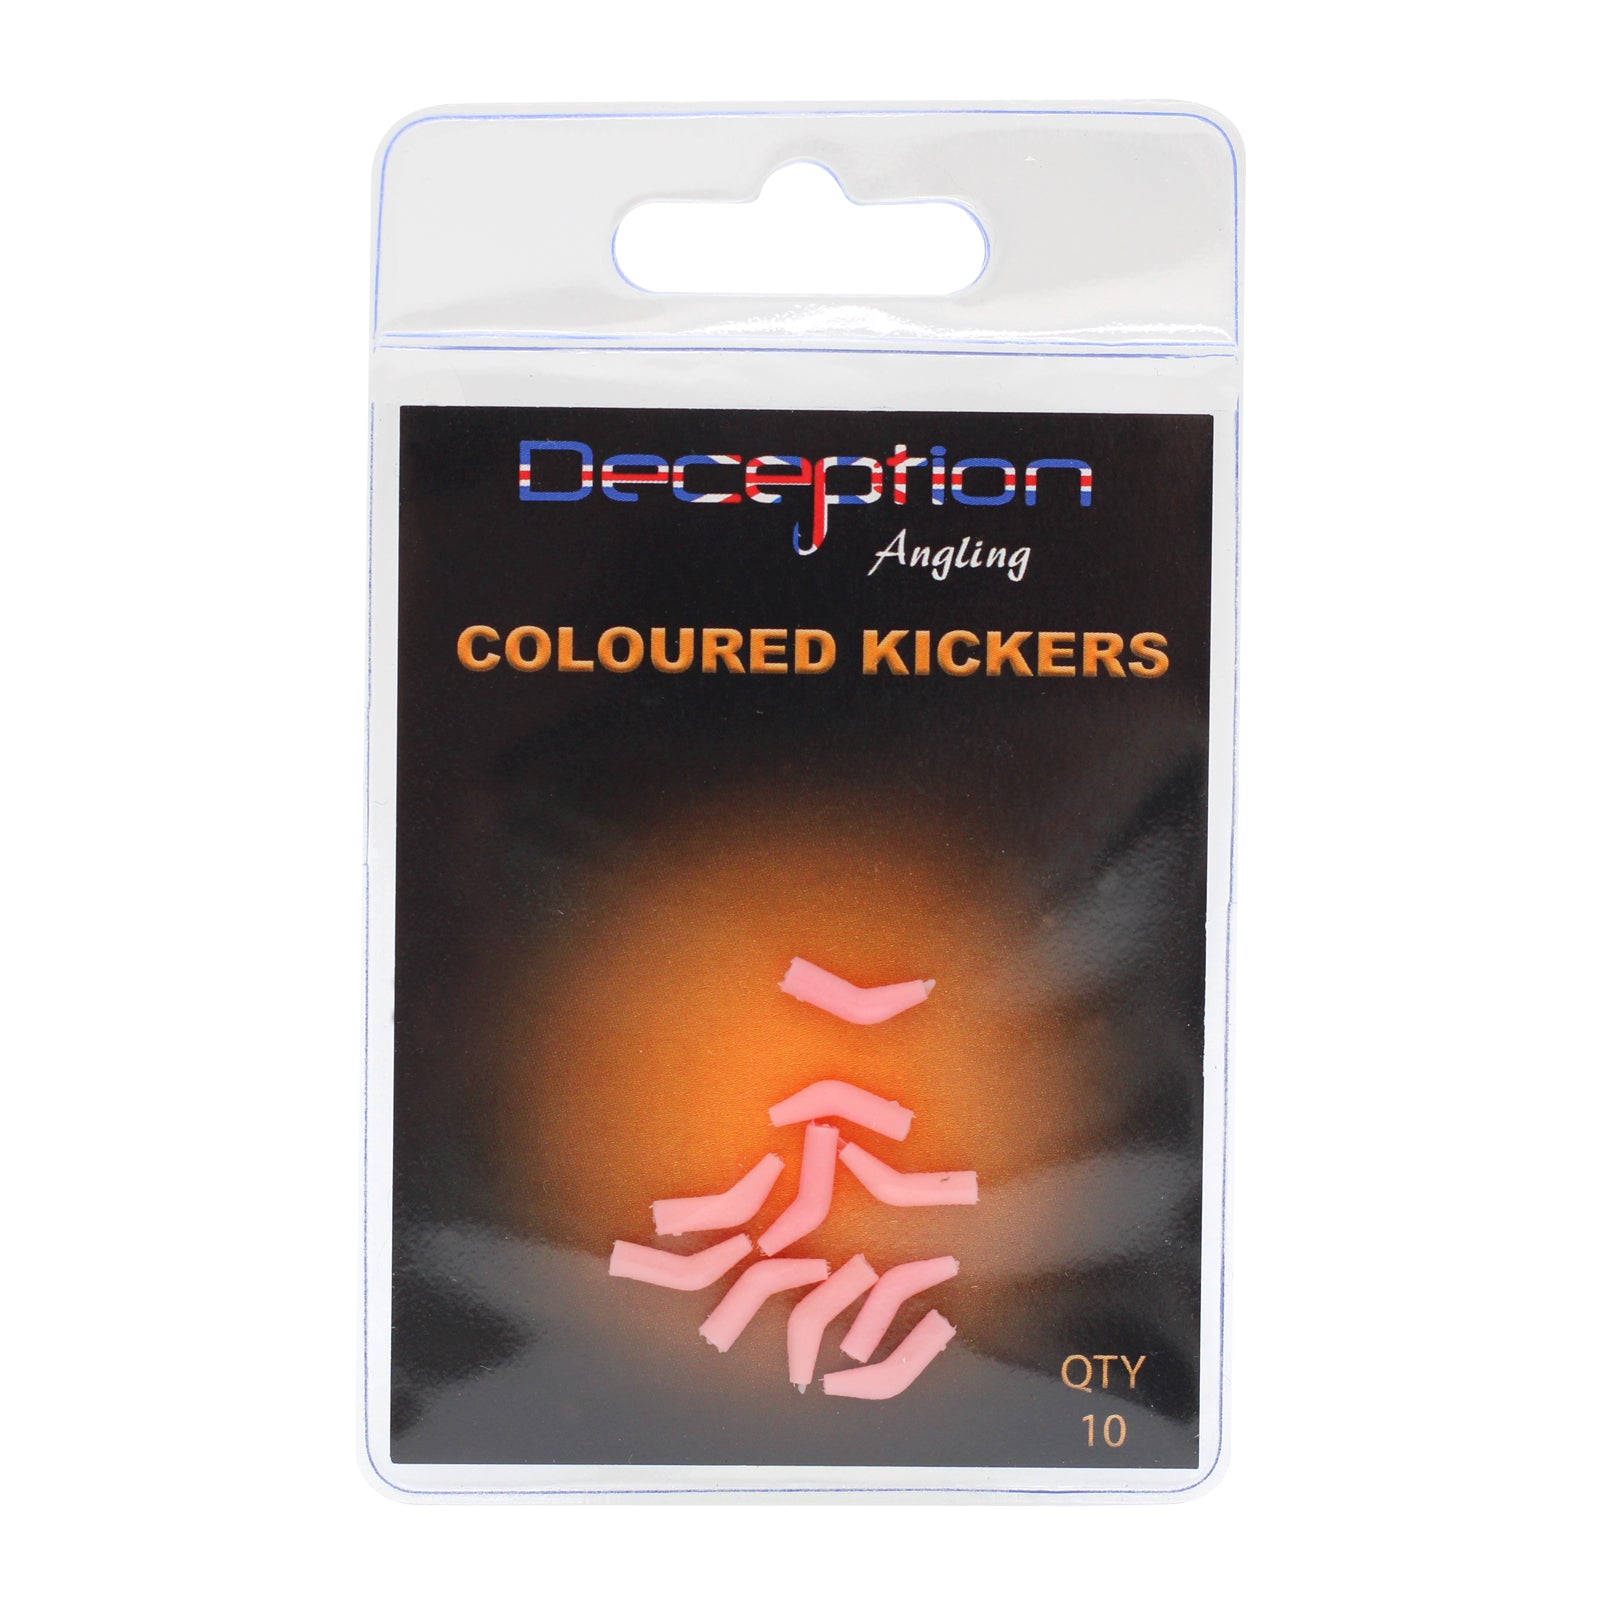 Deception Angling Coloured Kickers for Fishing Pack of 10